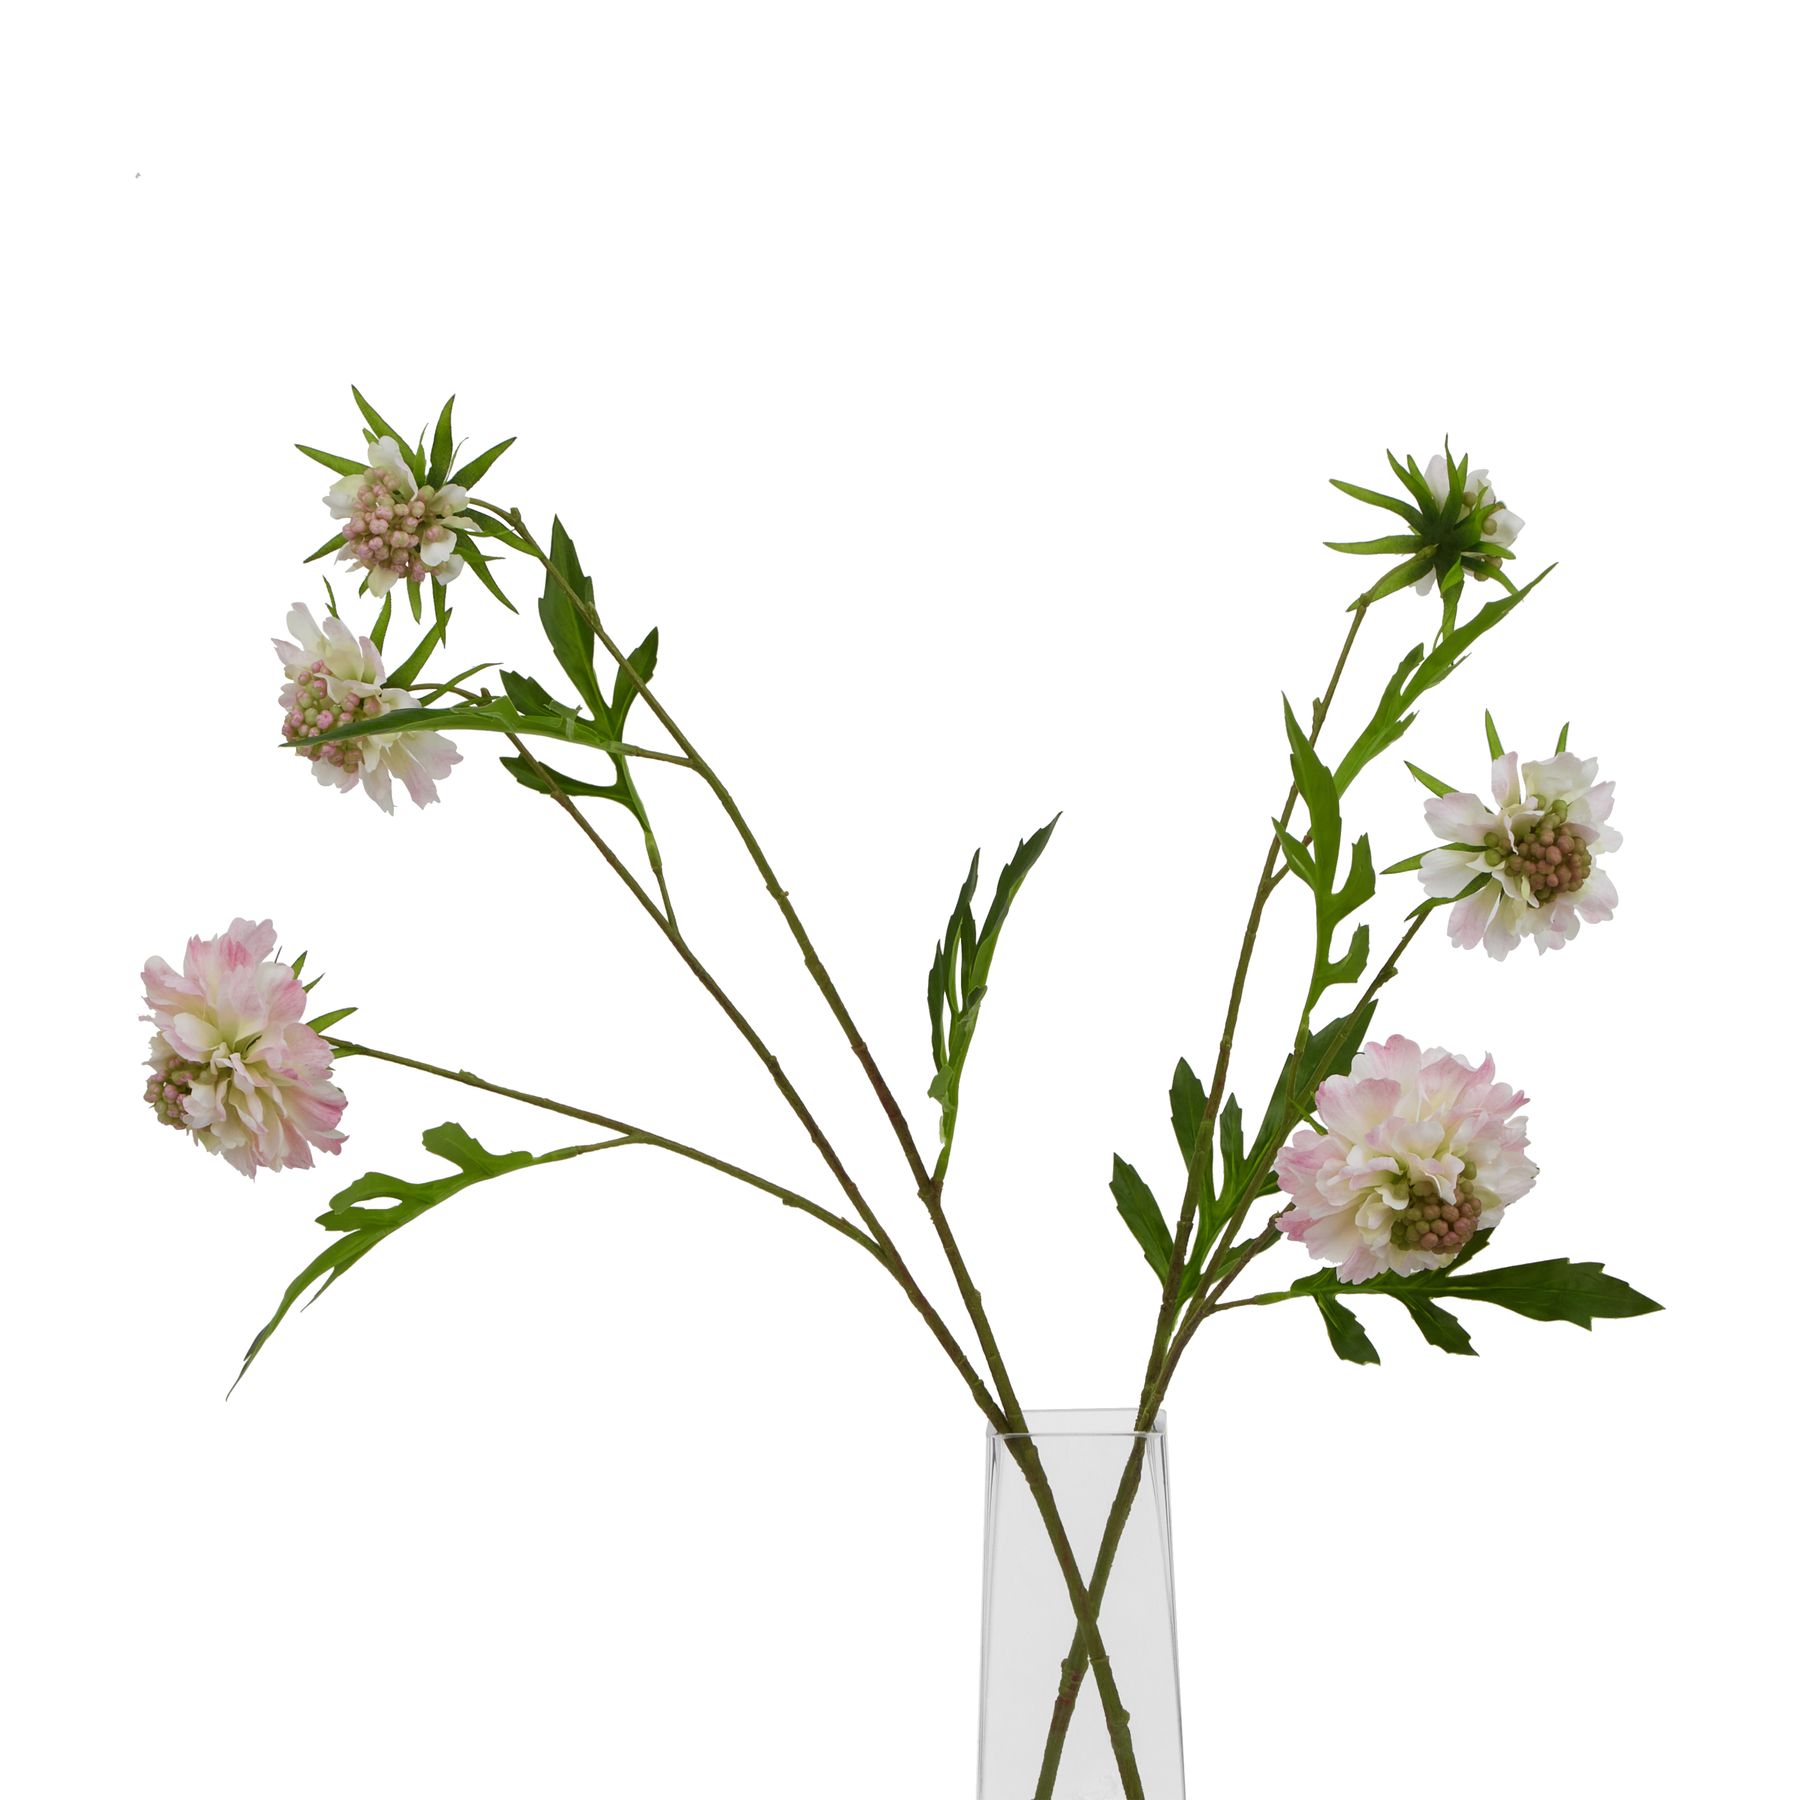 The Natural Garden Collection Pale Pink Scabious Stem - Image 3